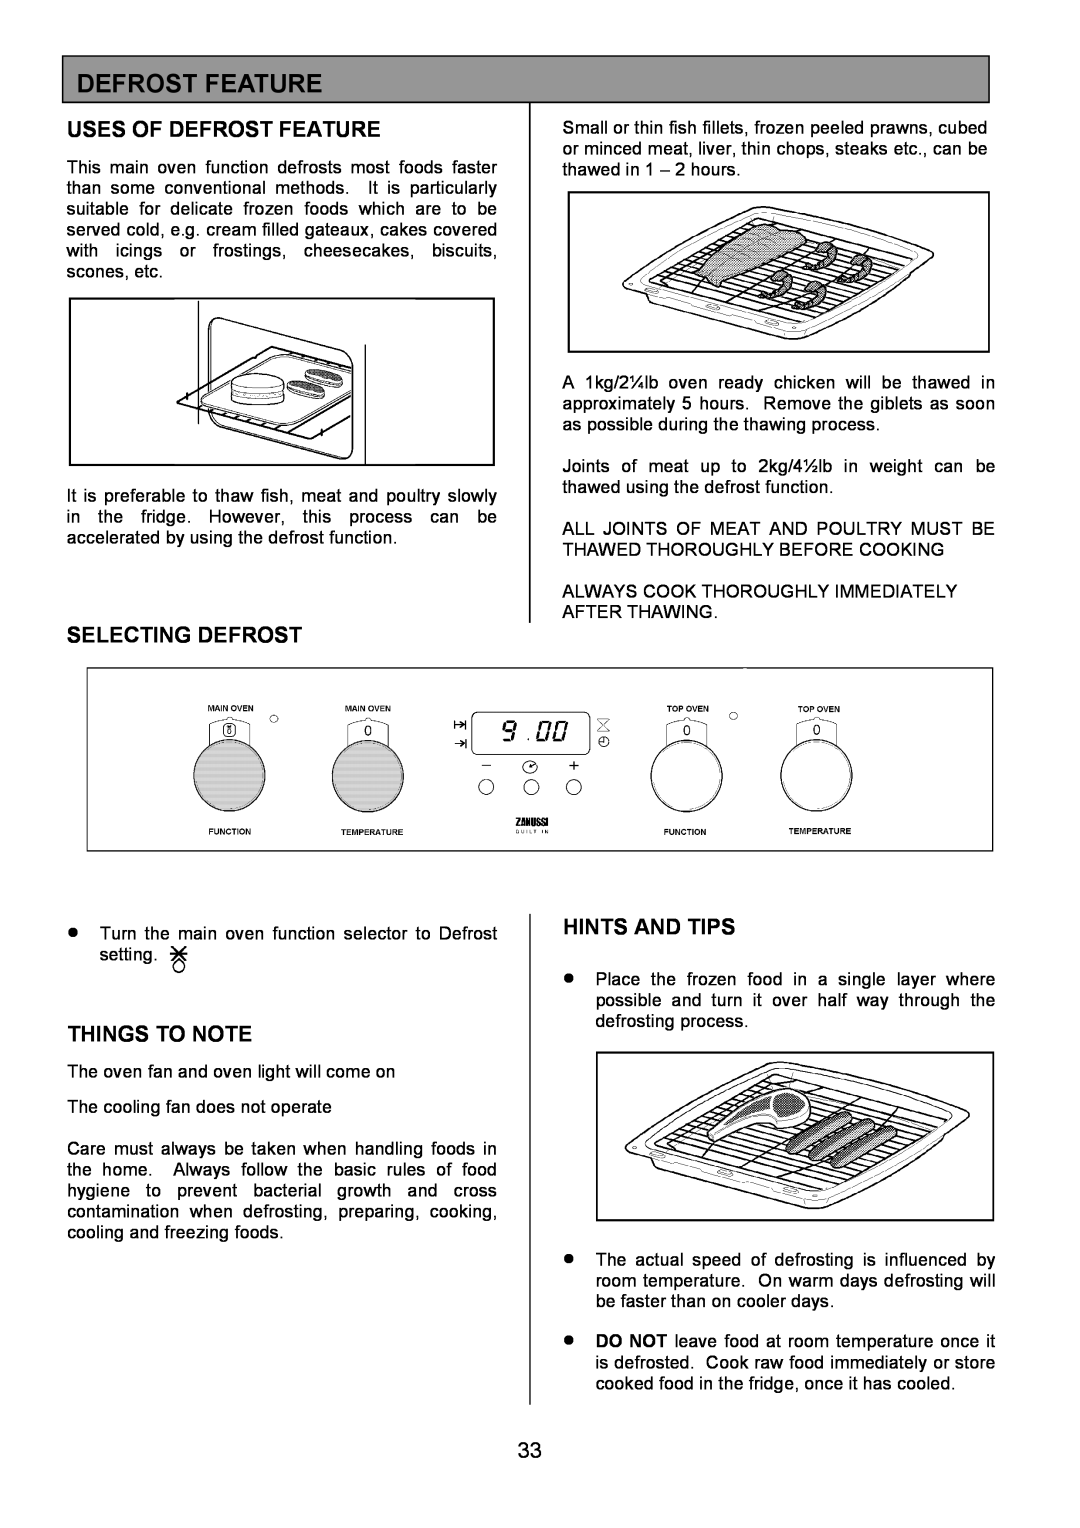 Zanussi ZDQ 695 manual Uses Of Defrost Feature, Selecting Defrost, Things To Note, Hints And Tips 